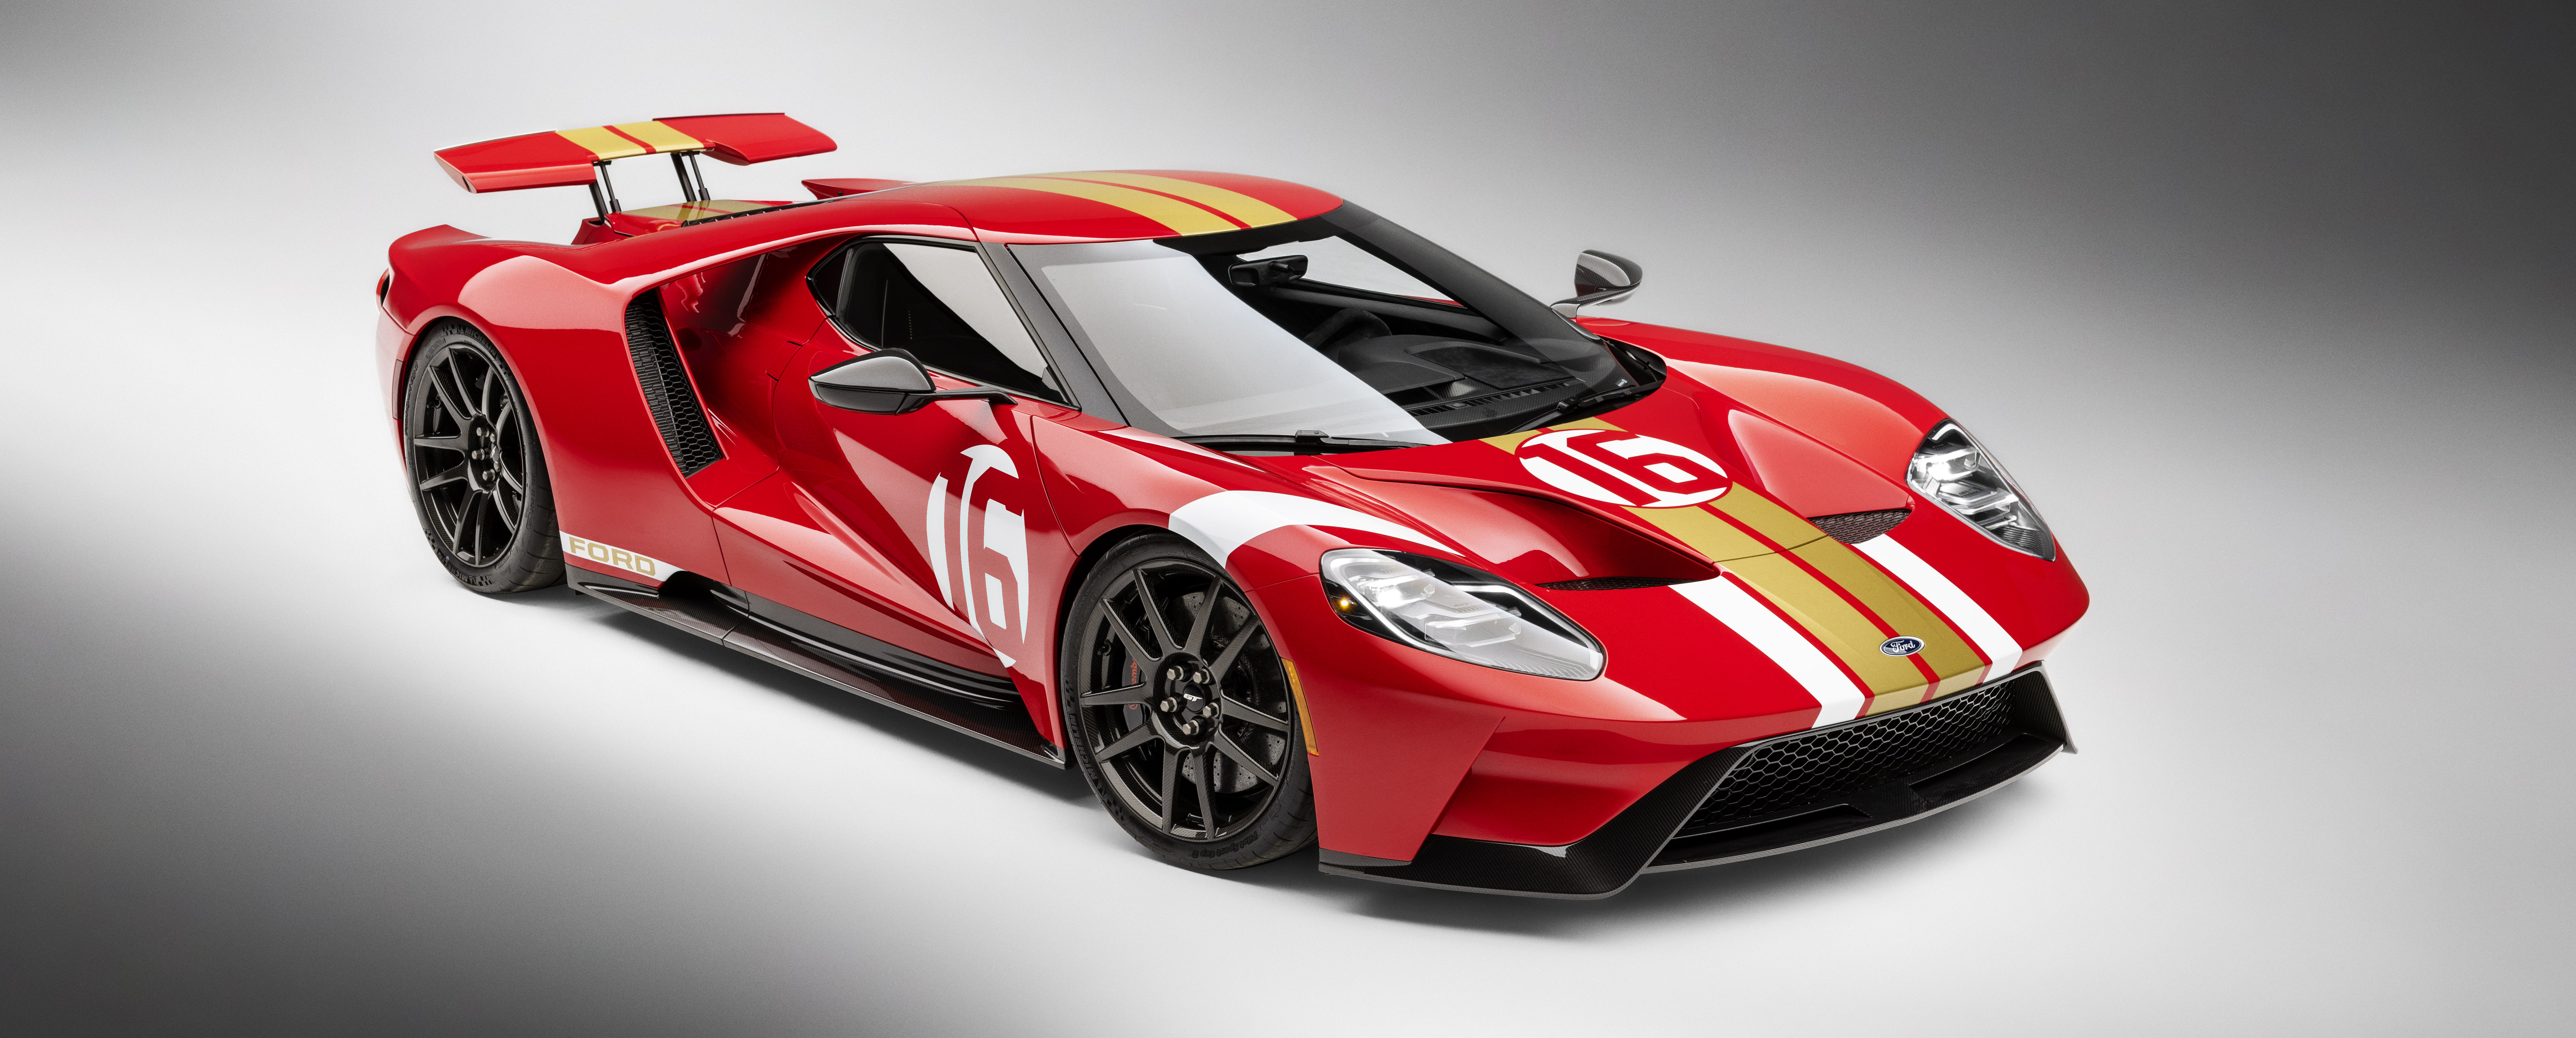 Ford GT Alan Mann Heritage Edition Pays Homage to Racing Legends